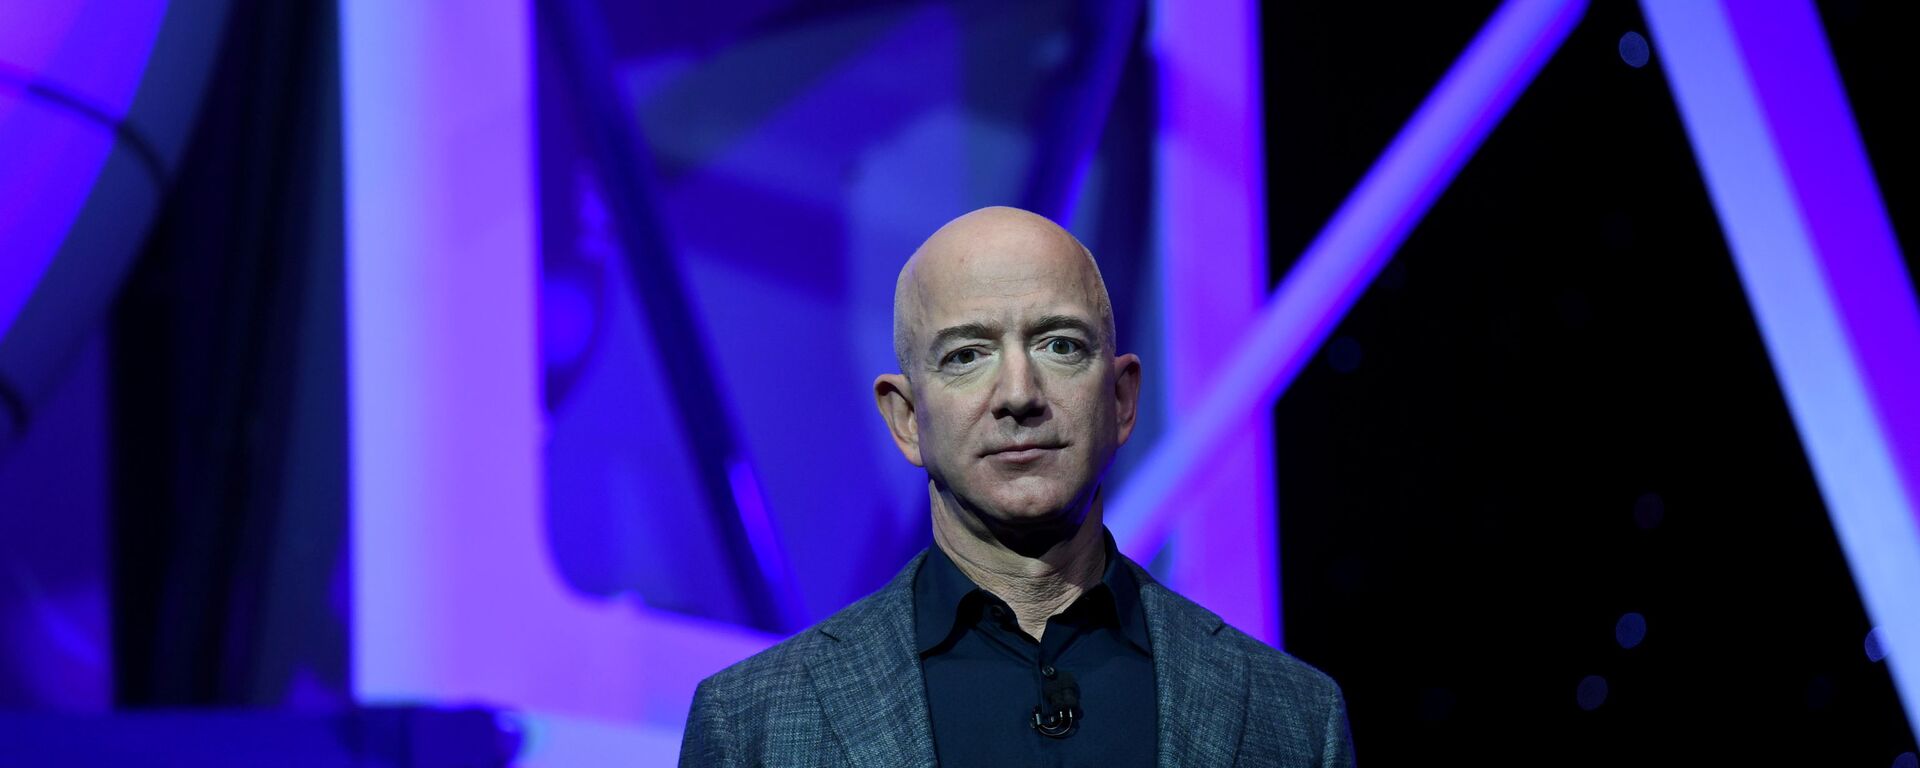 Founder, Chairman, CEO and President of Amazon Jeff Bezos unveils his space company Blue Origin's space exploration lunar lander rocket called Blue Moon during an unveiling event in Washington, U.S., May 9, 2019. - Sputnik International, 1920, 12.12.2021